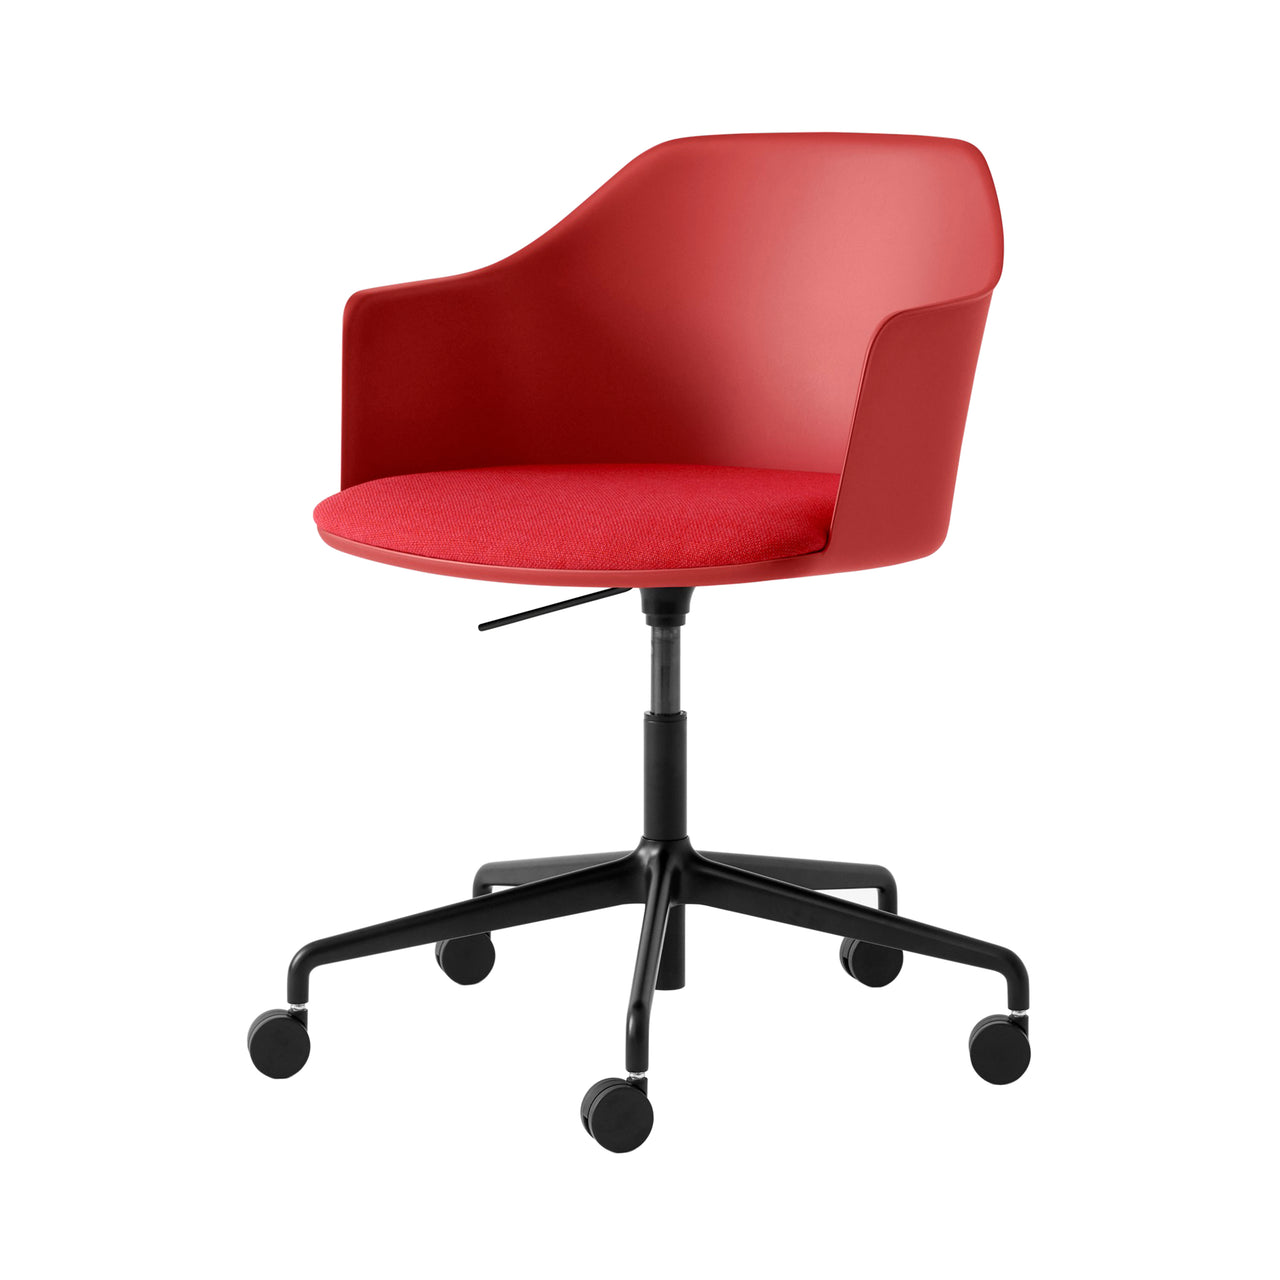 Rely Armchair HW54: Vermilion Red